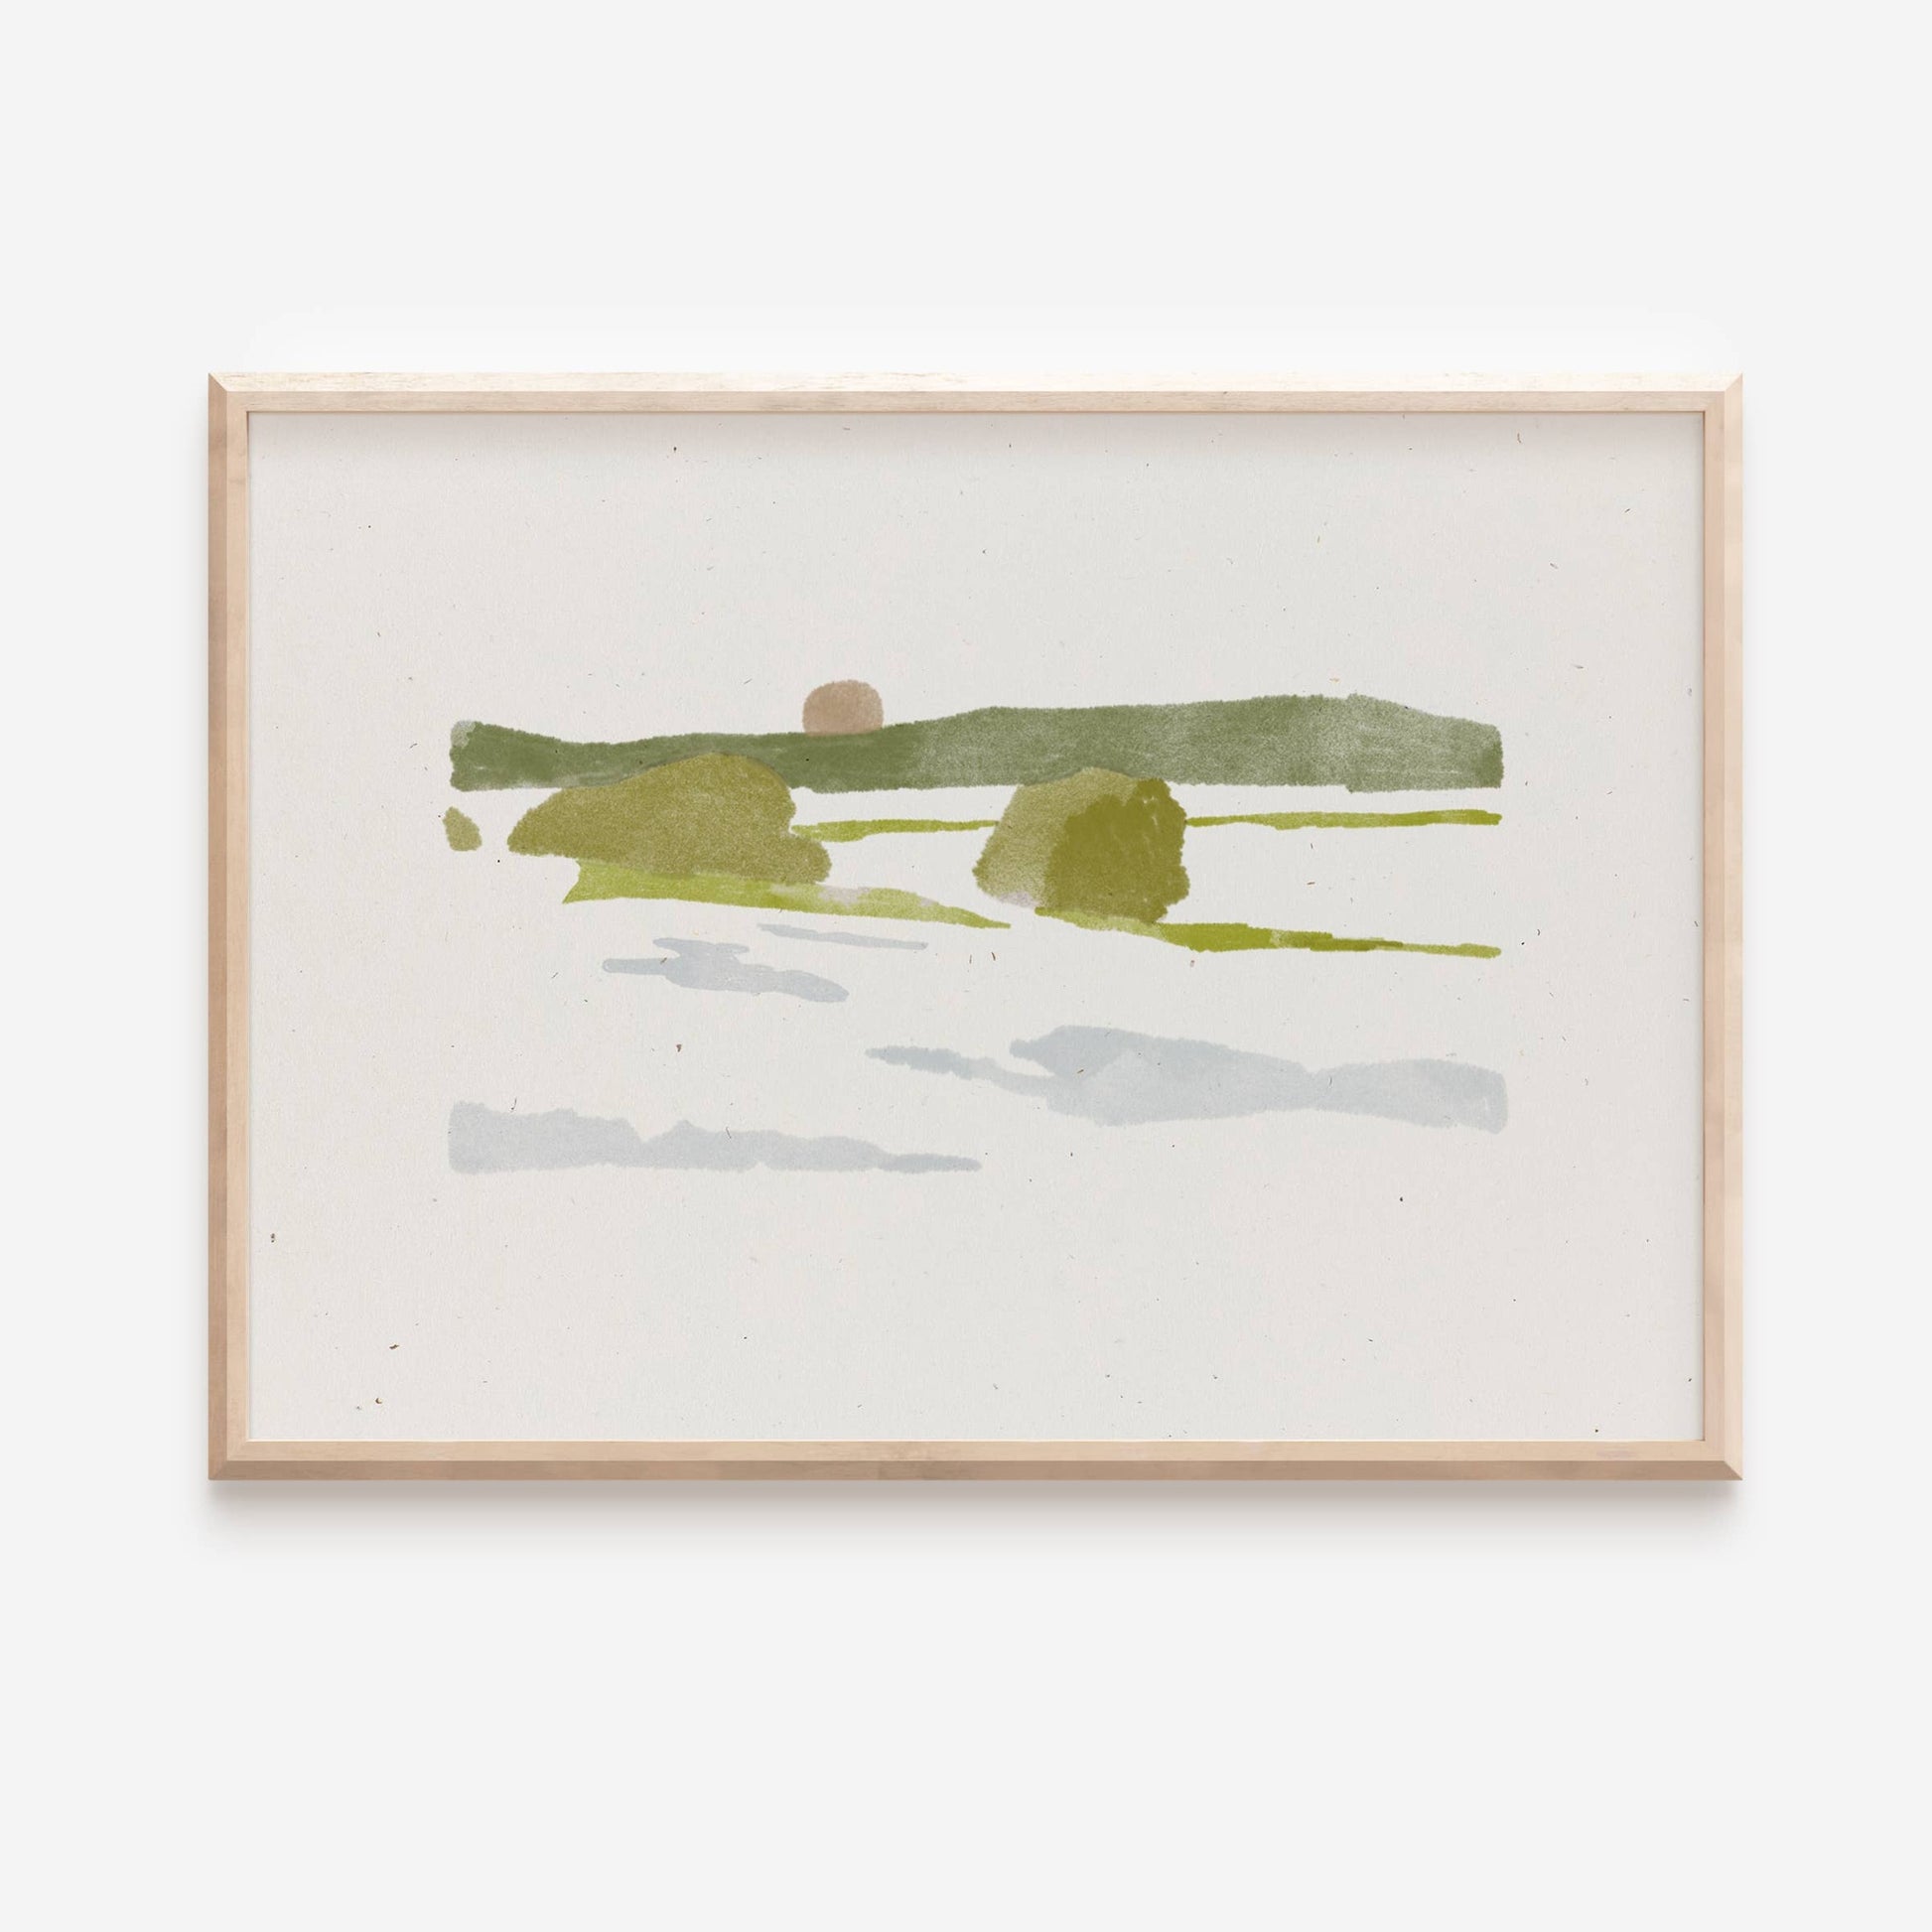 New art print by cocoshalom featuring a simple minimalist landscape image. 